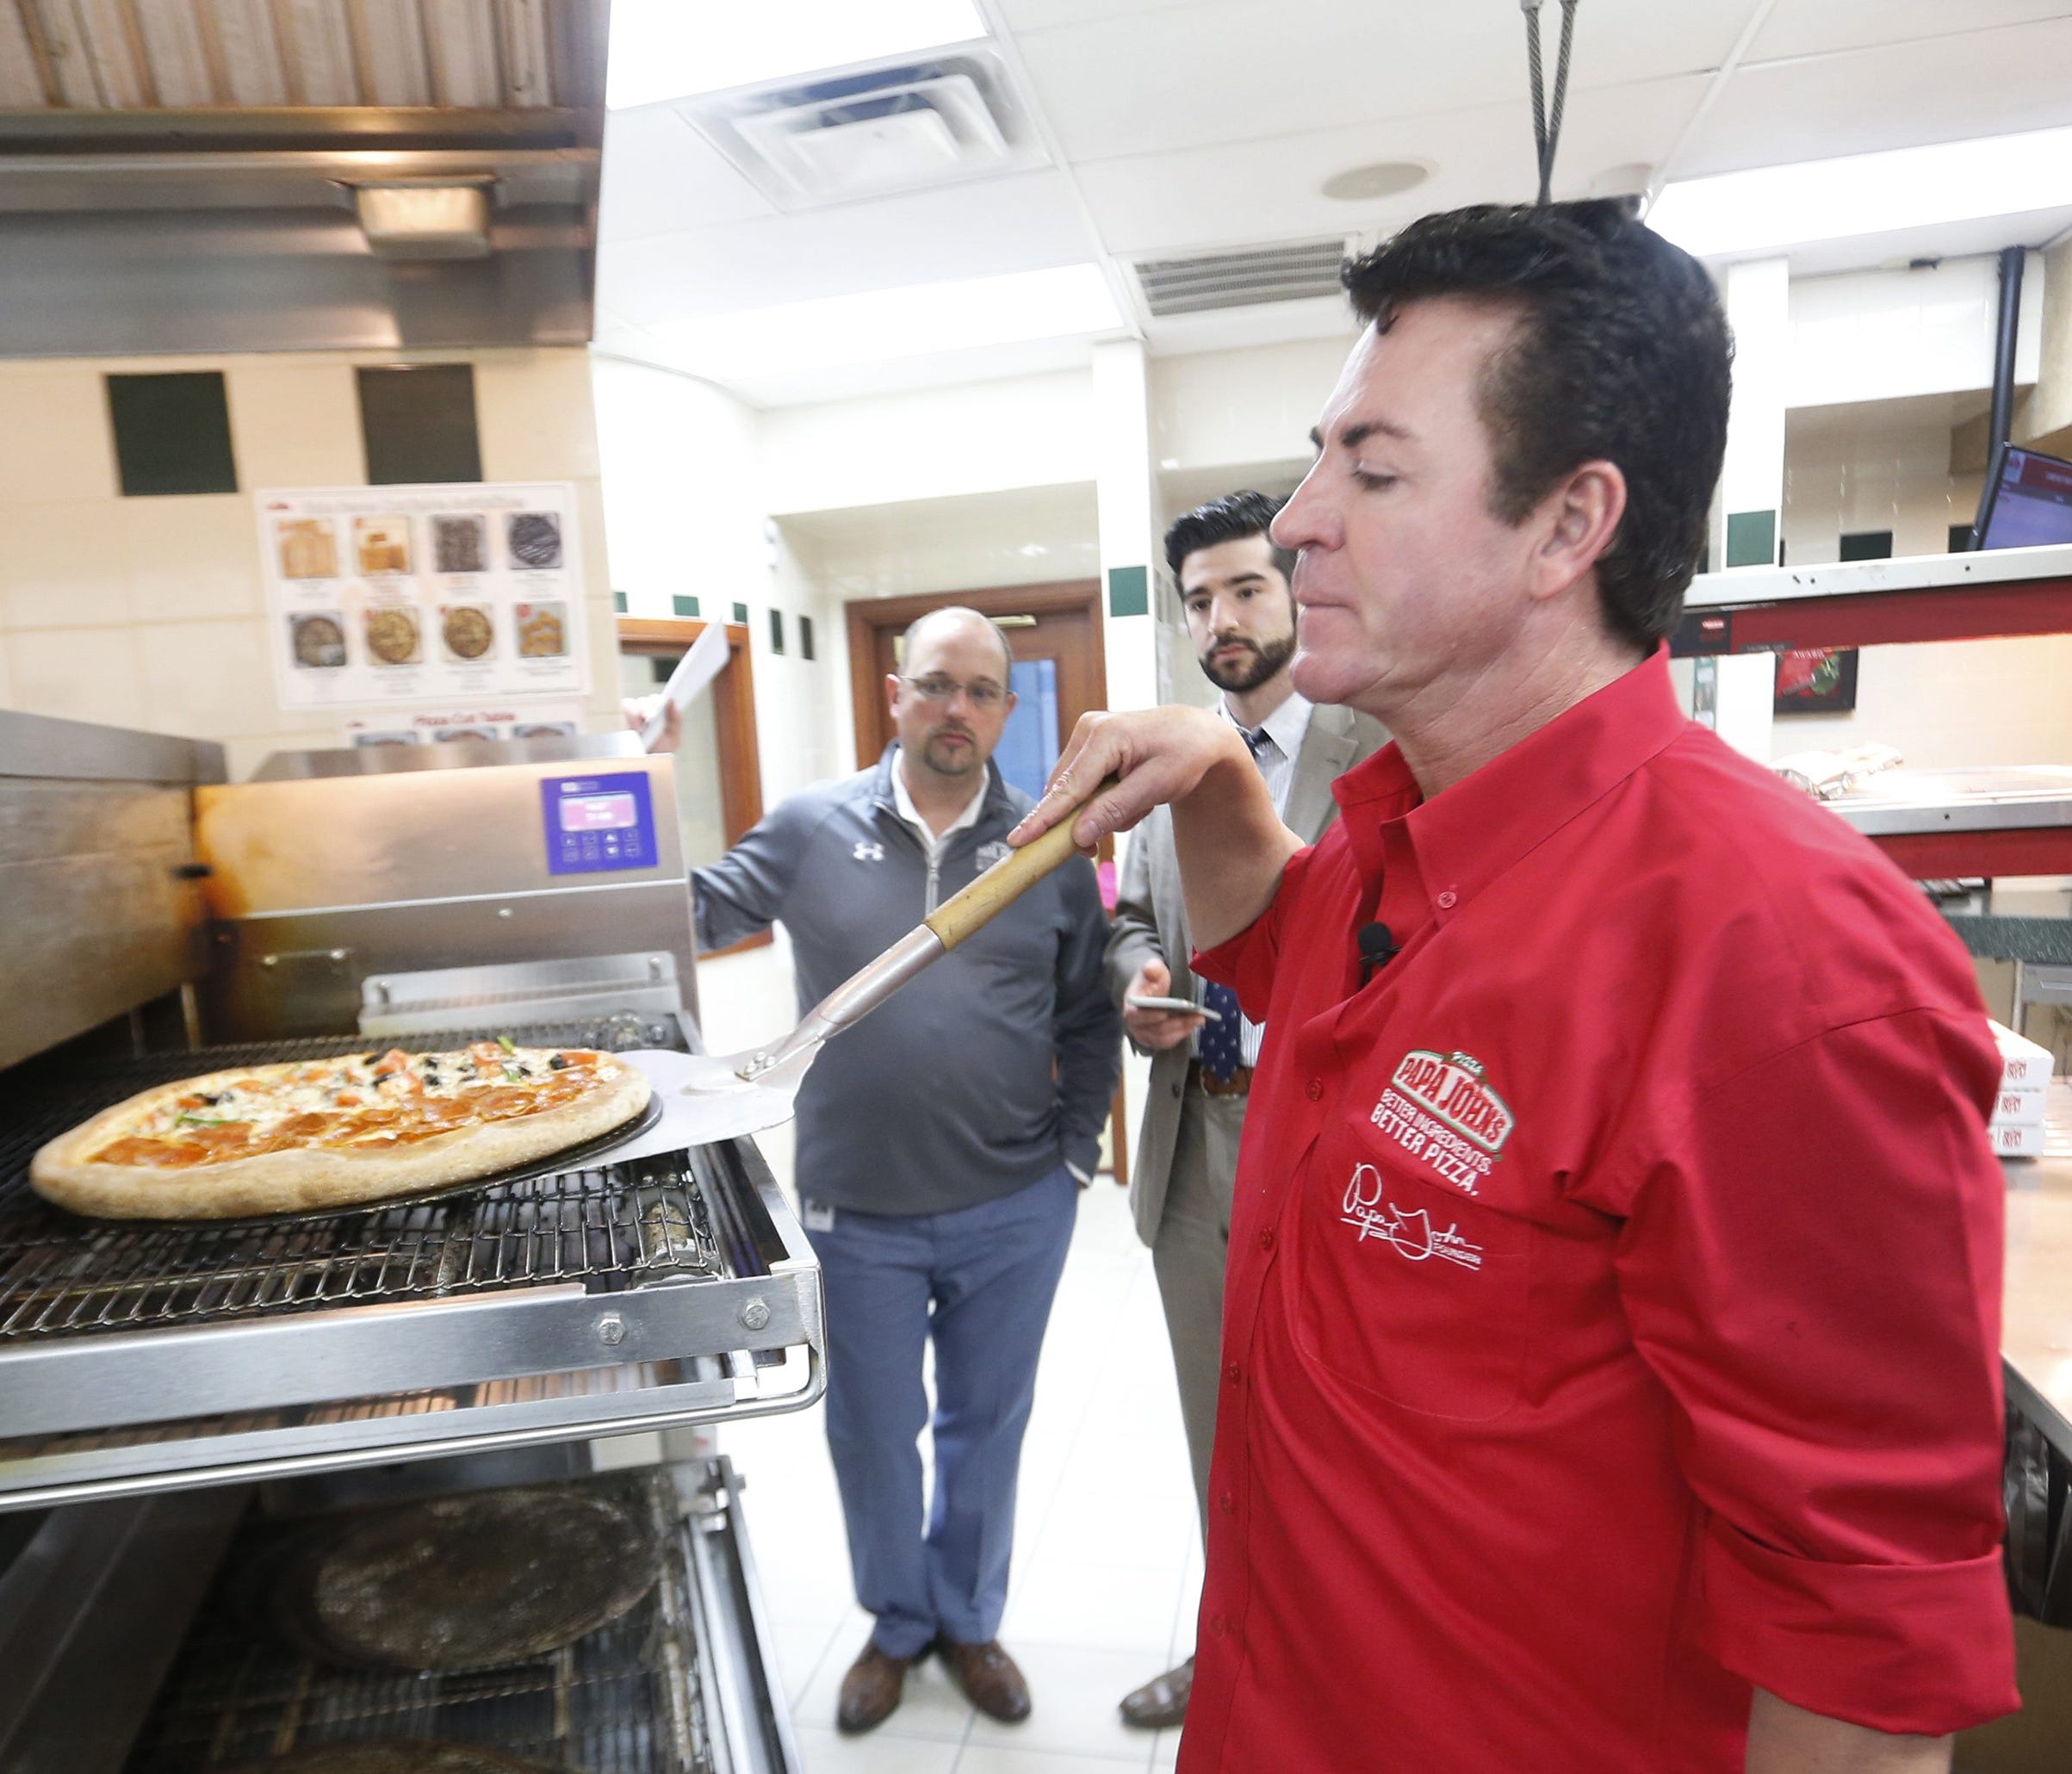 John Schnatter, of Papa John's Pizza places a pie in the oven in the kiitchen at the company's headquarters. By Pat McDonogh, The Courier-Journal. Jan. 26, 2016. [Via MerlinFTP Drop]